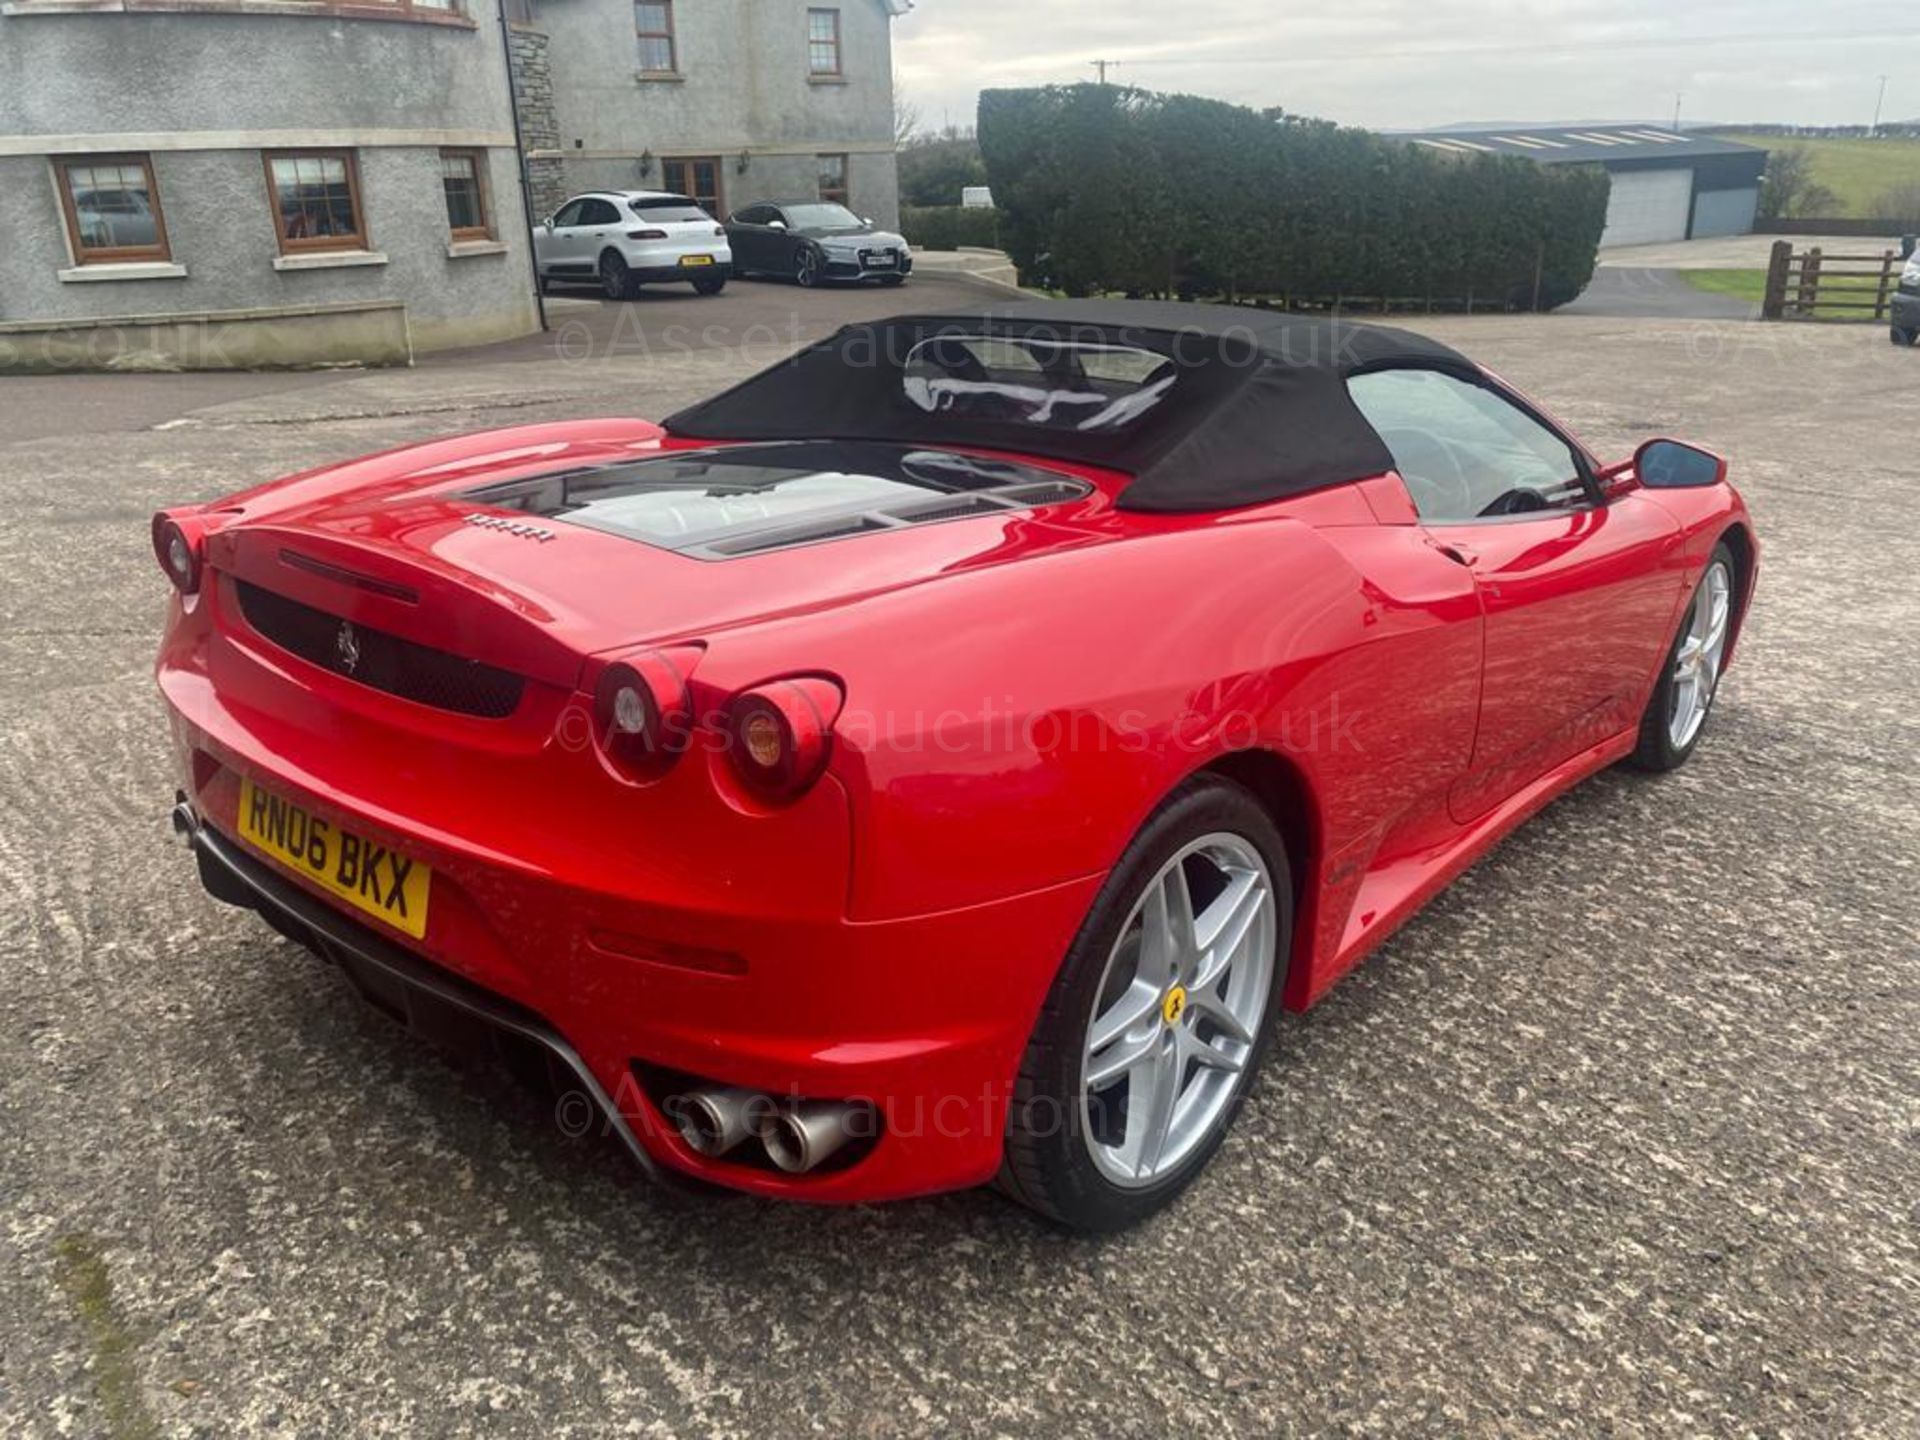 2006 FERRARI F430 SPIDER F1 CONVERTIBLE RED SPORTS CAR, SHOWING 3 FORMER KEEPERS *NO VAT* - Image 8 of 28